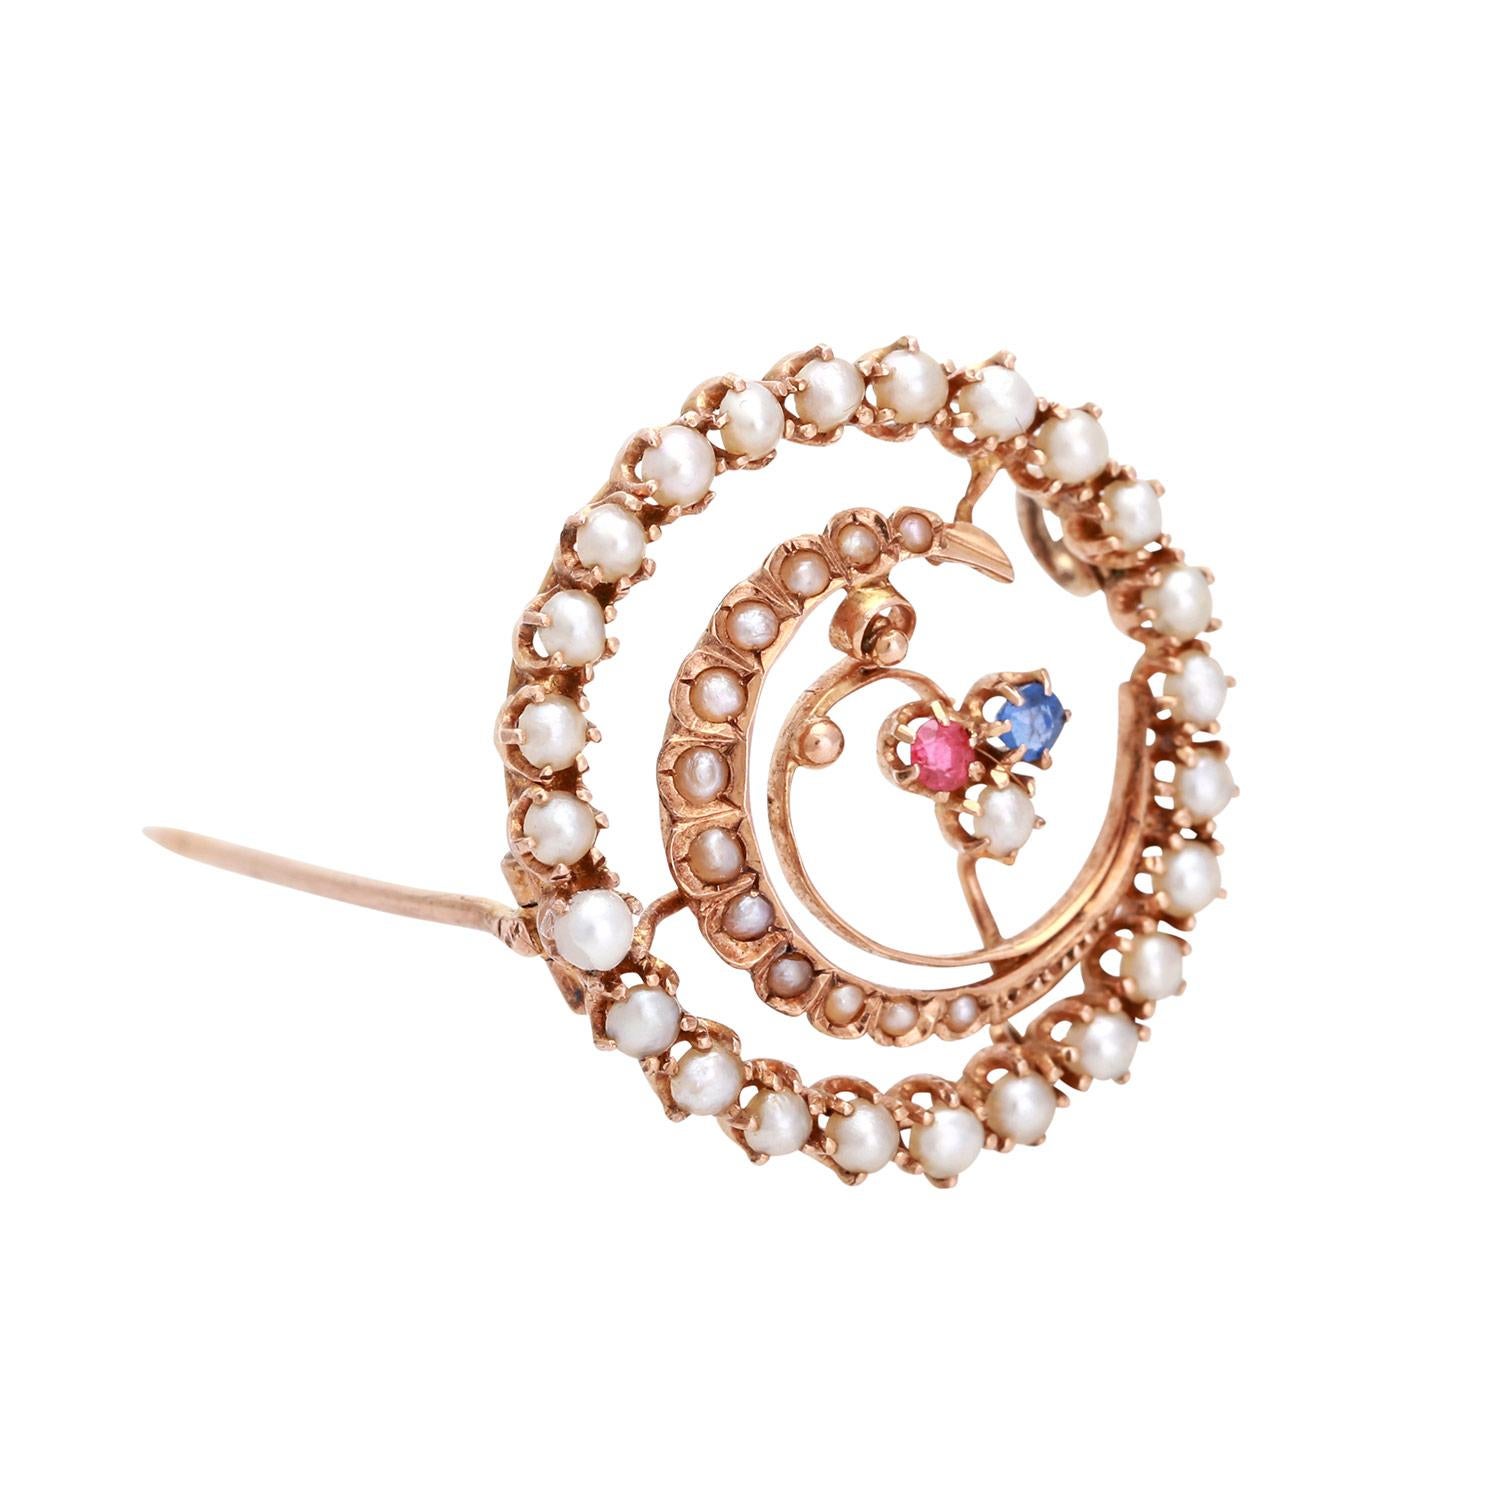 Round brooch with half pearls and synthetic corundums in GG 14K. D: about 25mm Slight traces of wear, trimmings partially worn, 1 pearl replaced. <br><br>Half pearls, synthetic corundum, 14K gold, diameter c. 25mm Minor signs of wear, stones/pearls